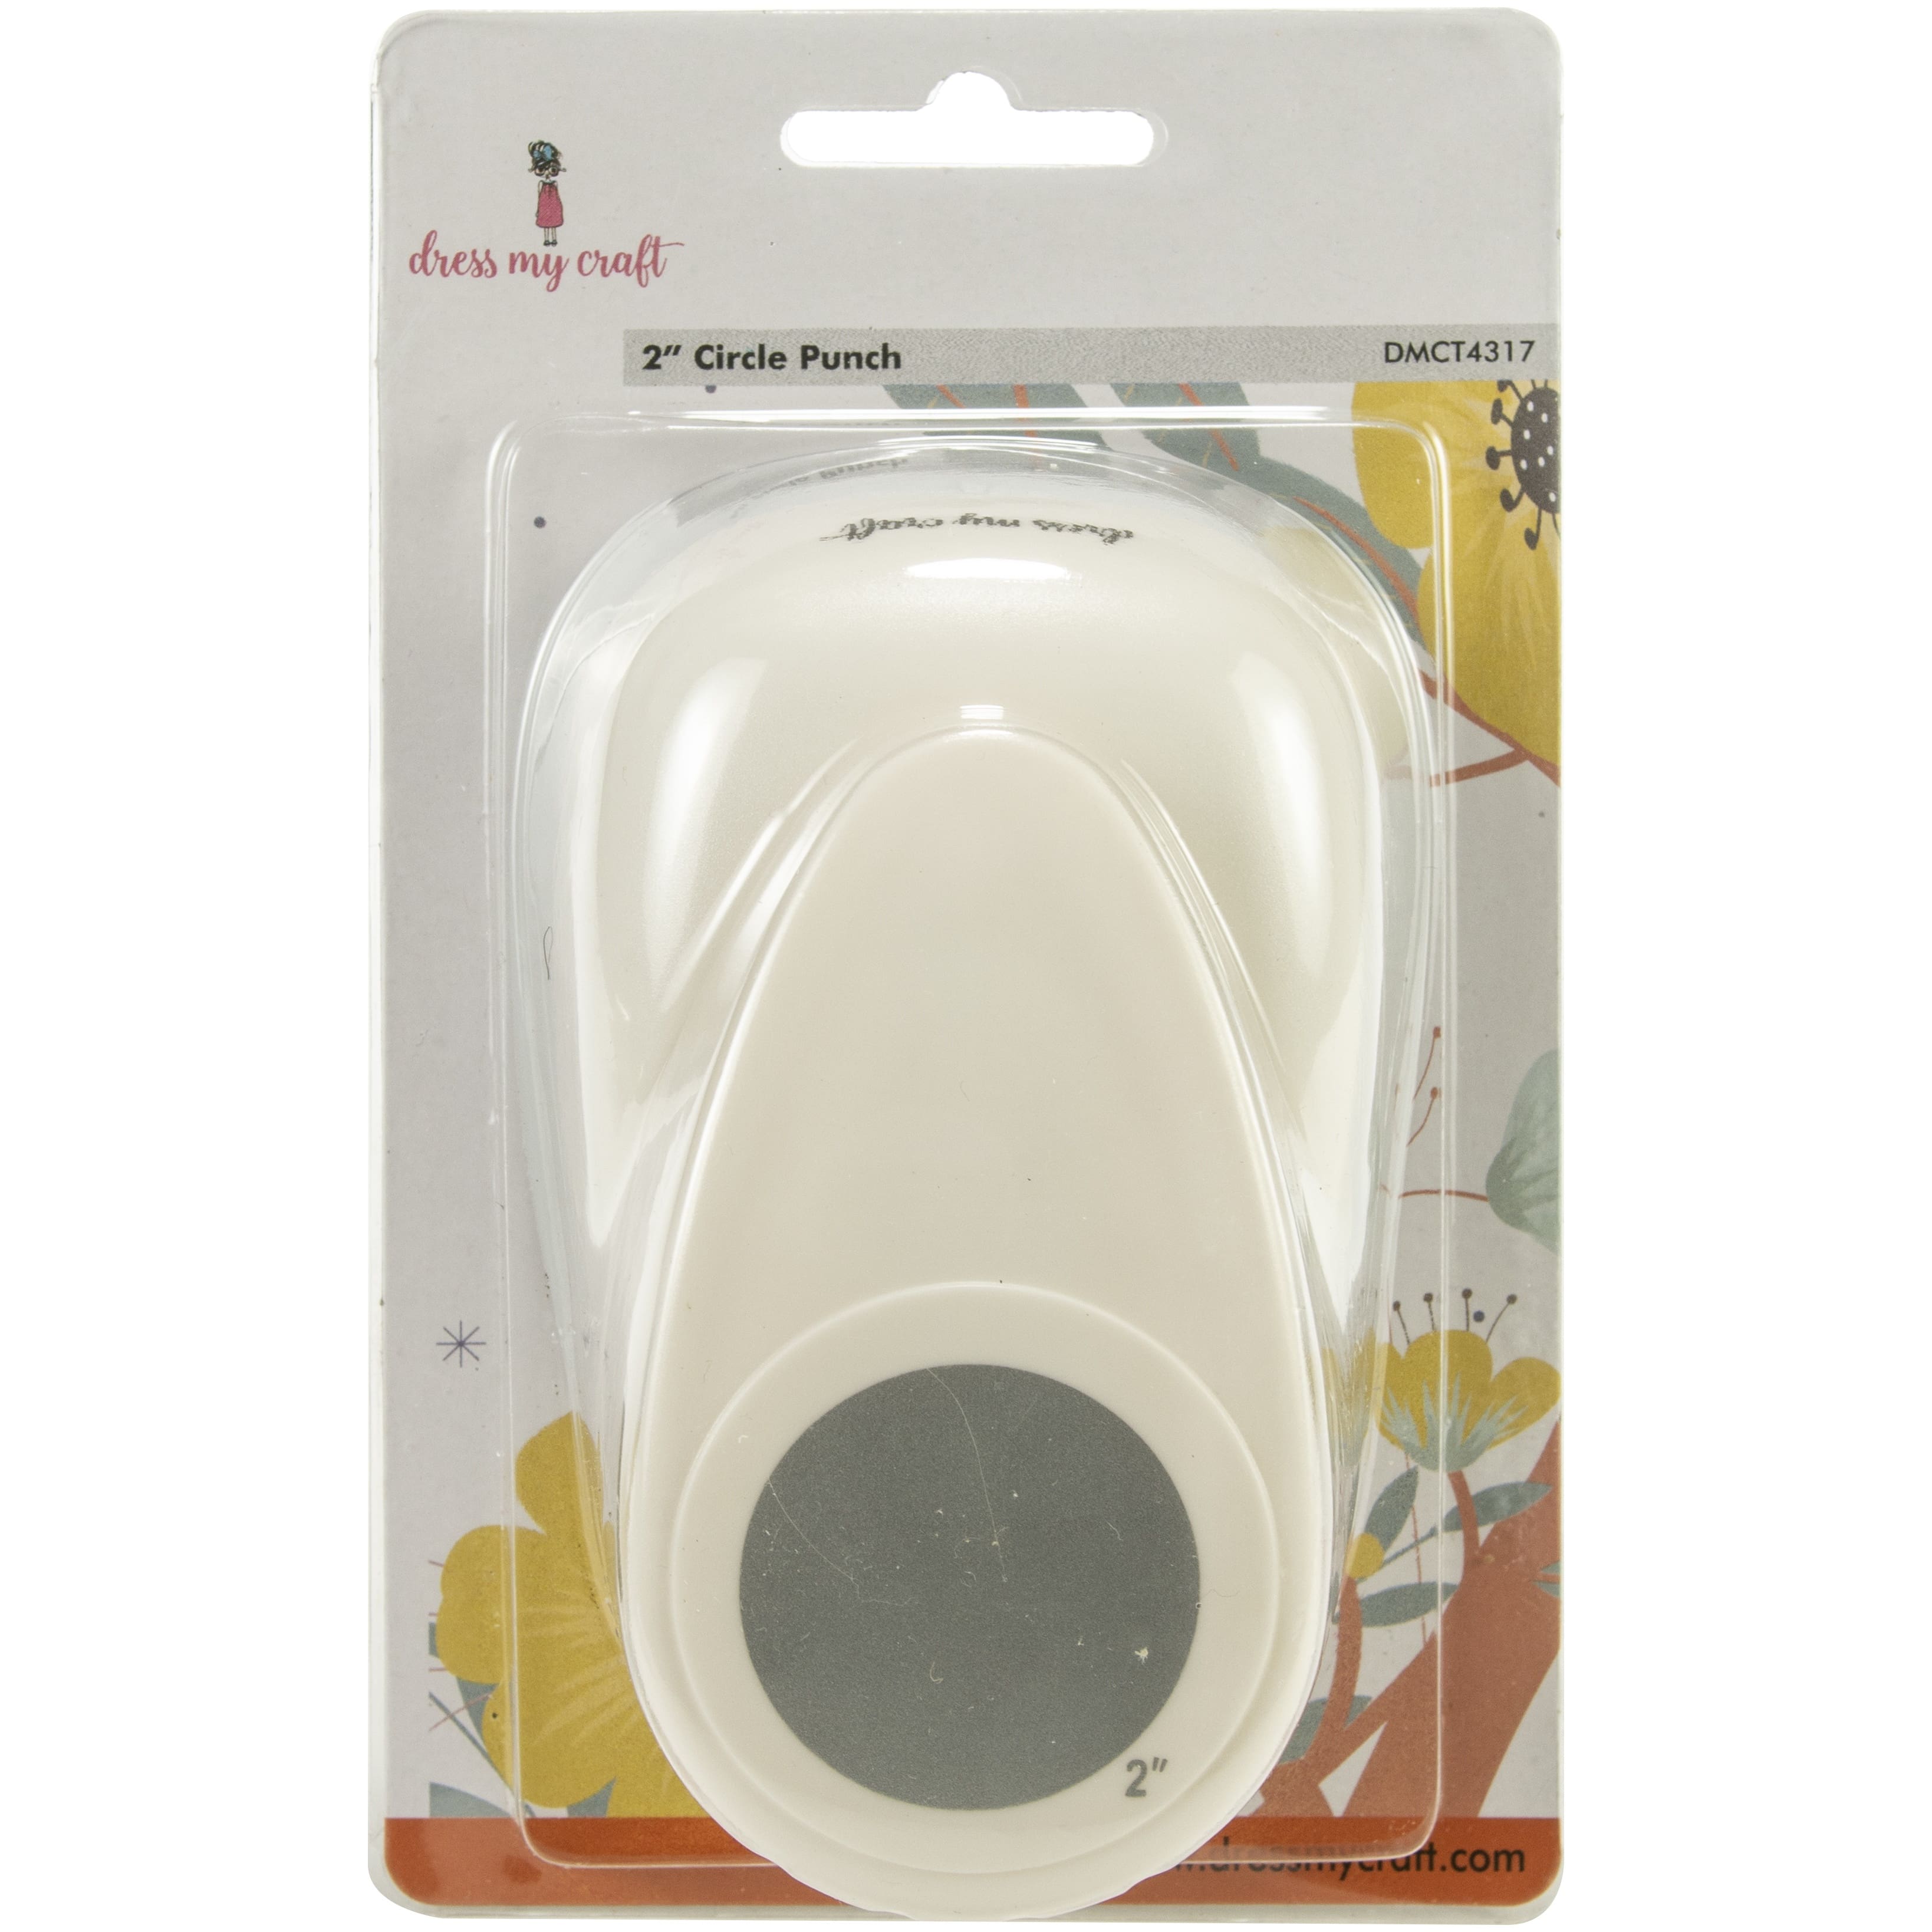 Dress My Craft Paper Punch-Reinforcement Hole, 1 count - Fry's